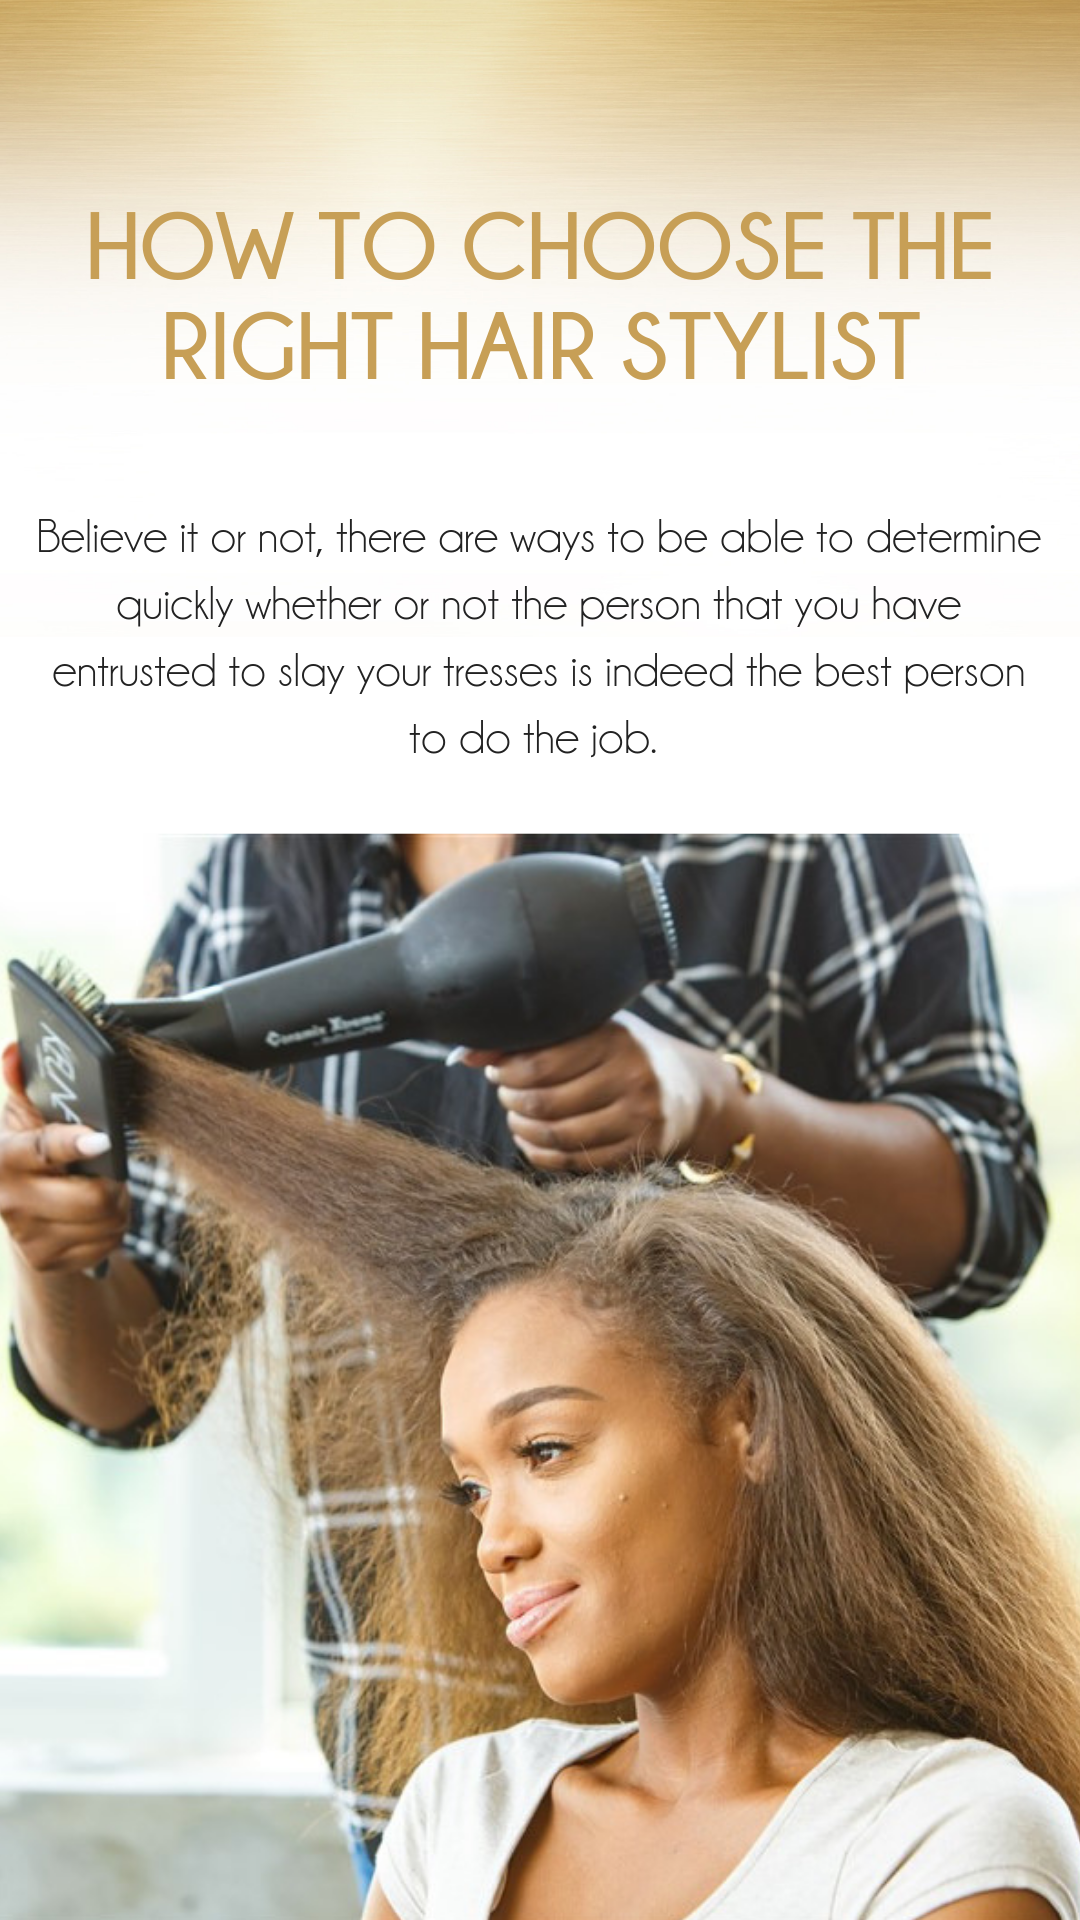 What did she just do? How to choose the right hair stylist